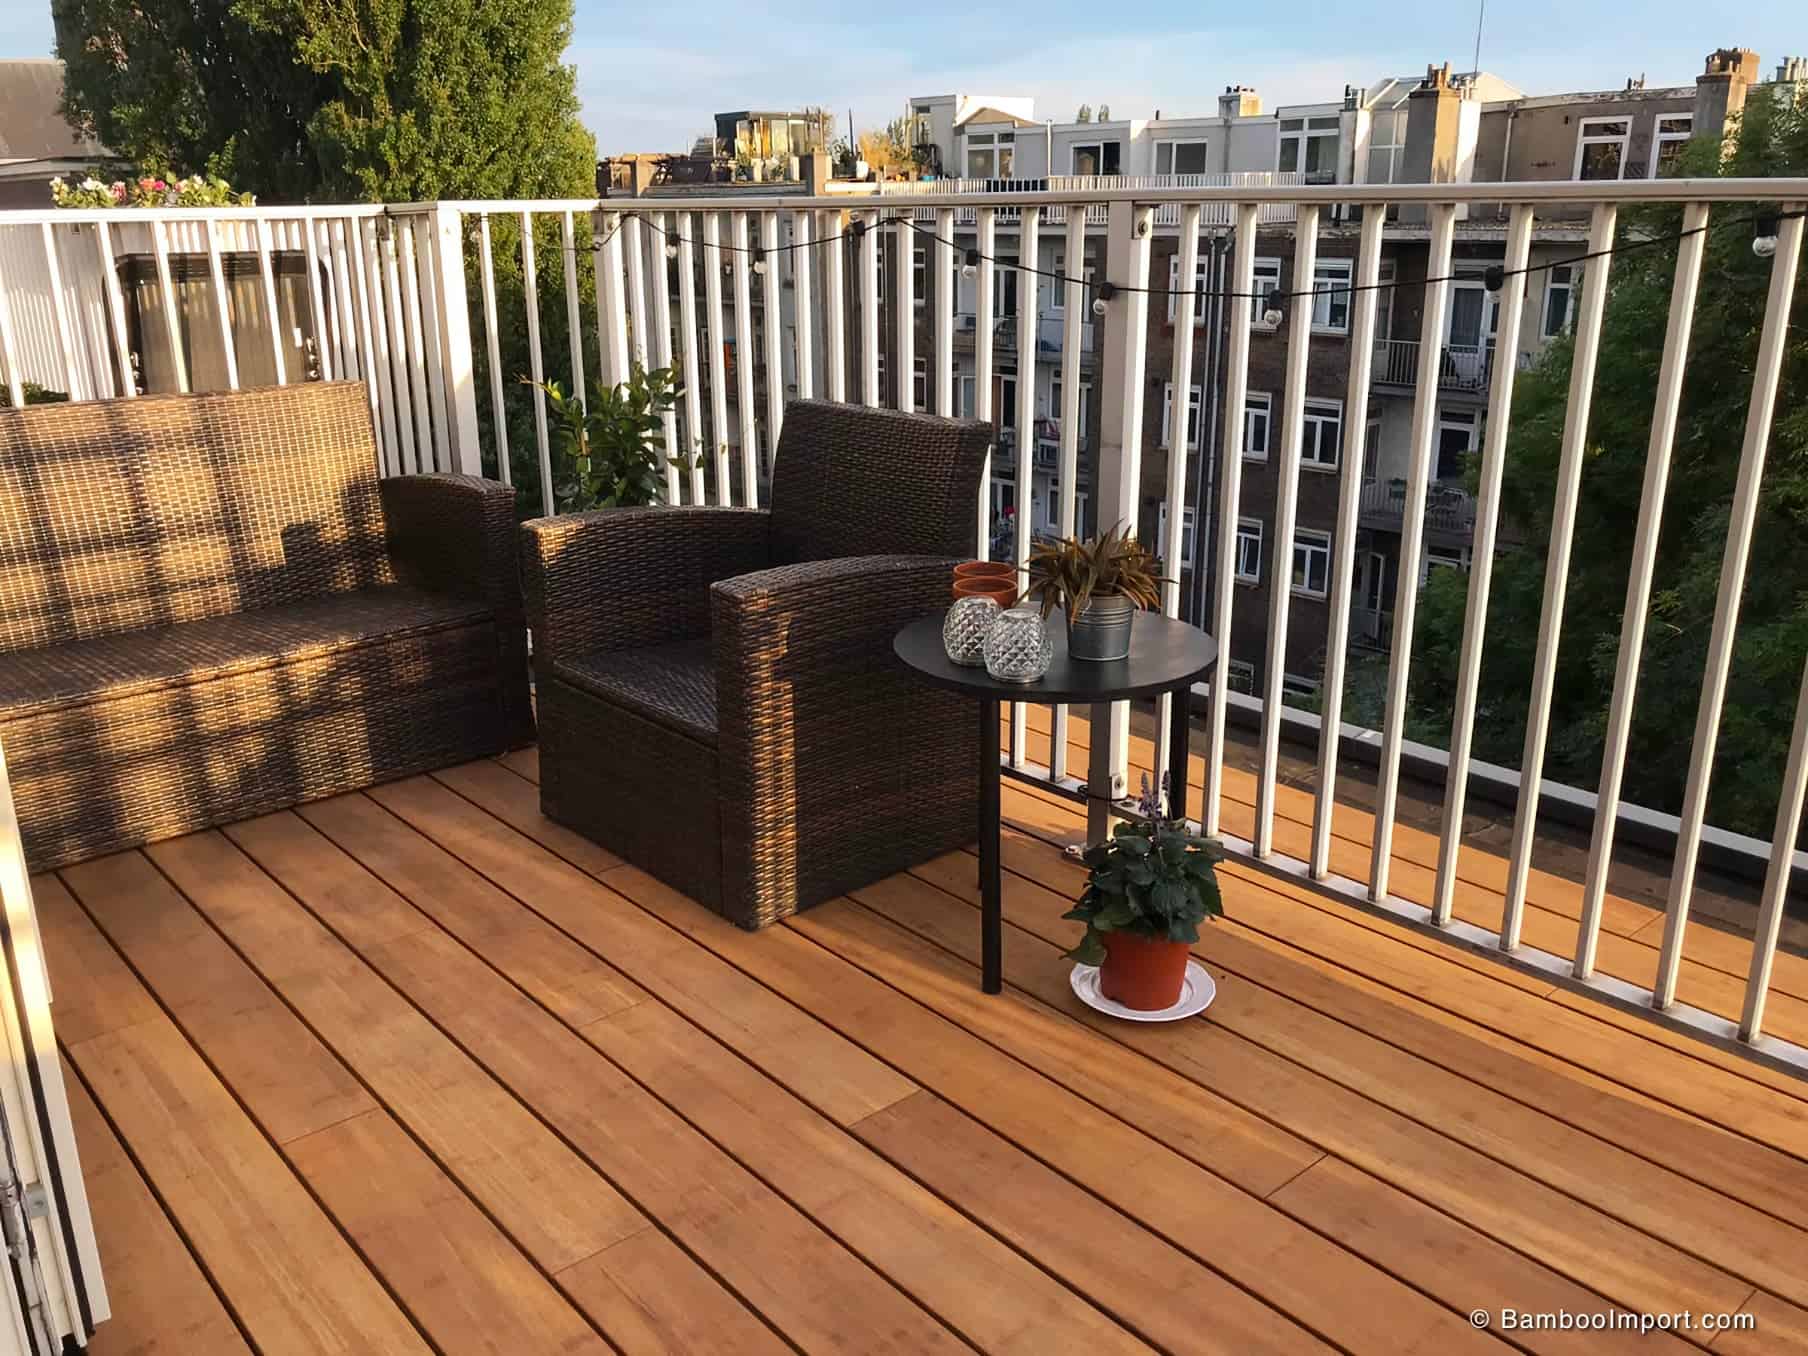 Bamboo terrasse Thermo - image1